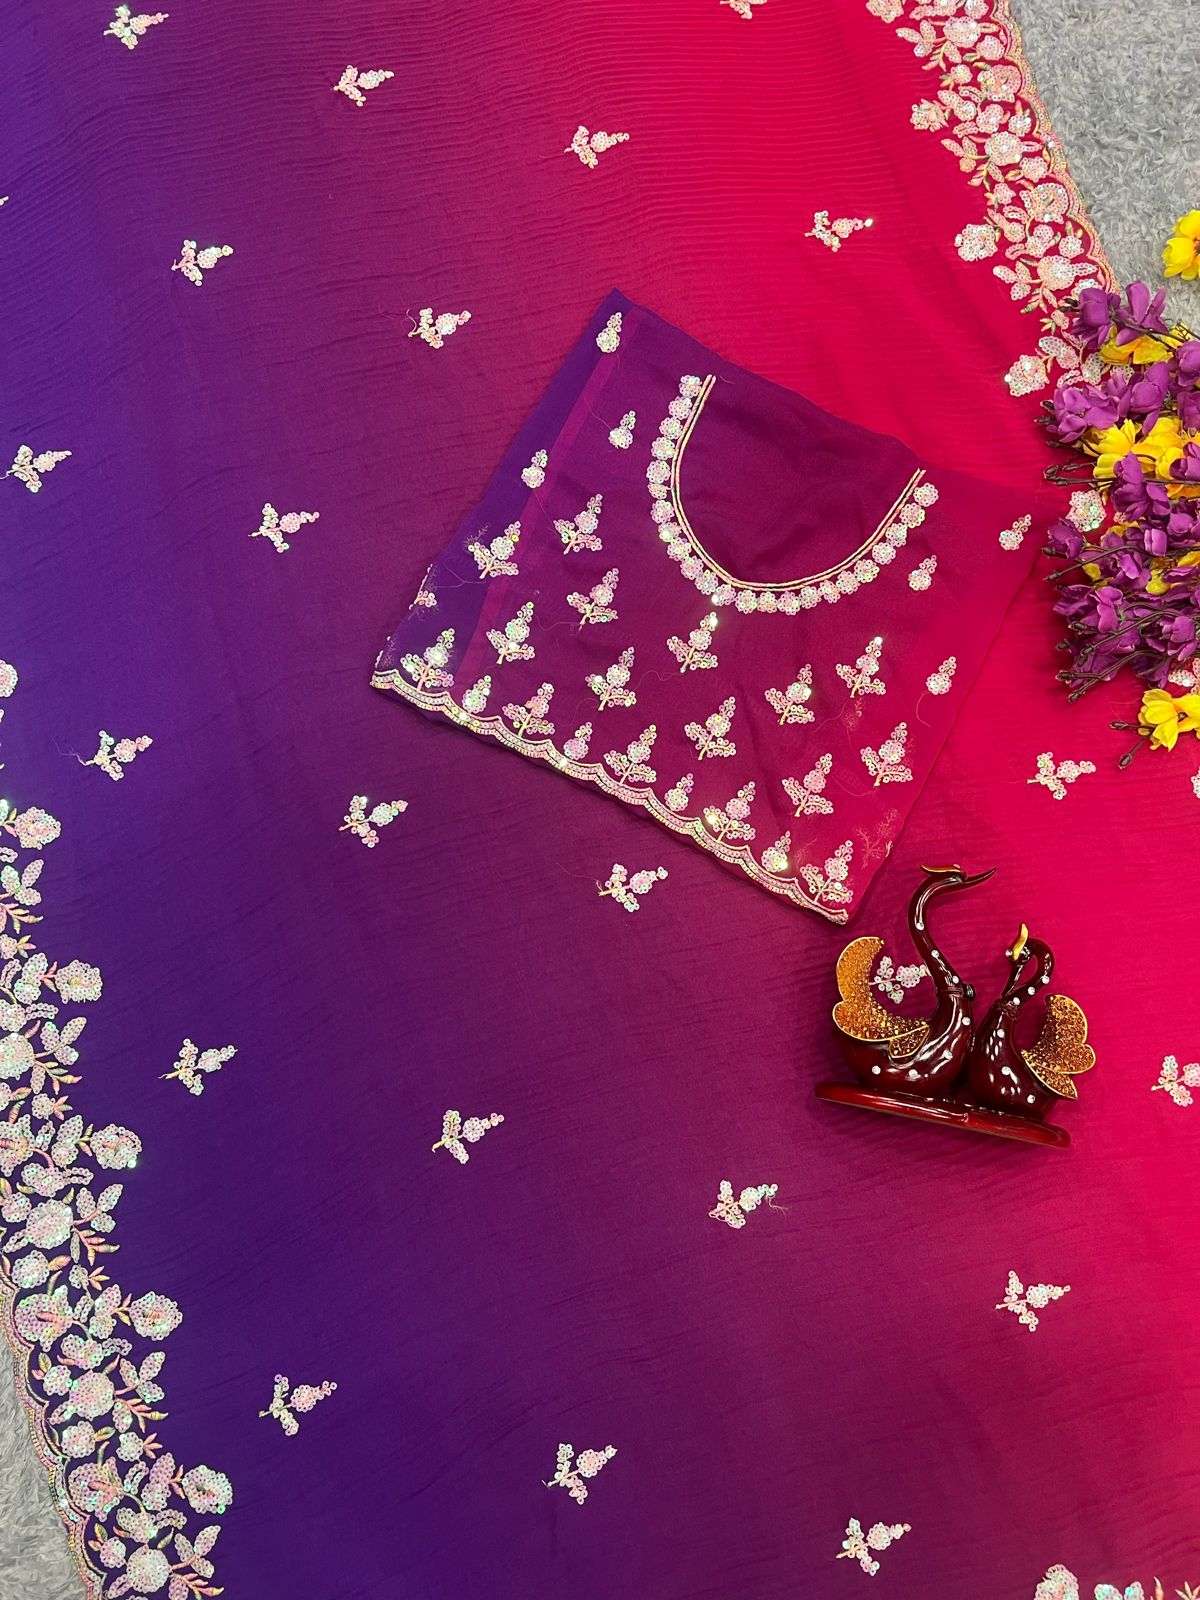 Marvelous Work With Pleated Purple Color Shade Saree